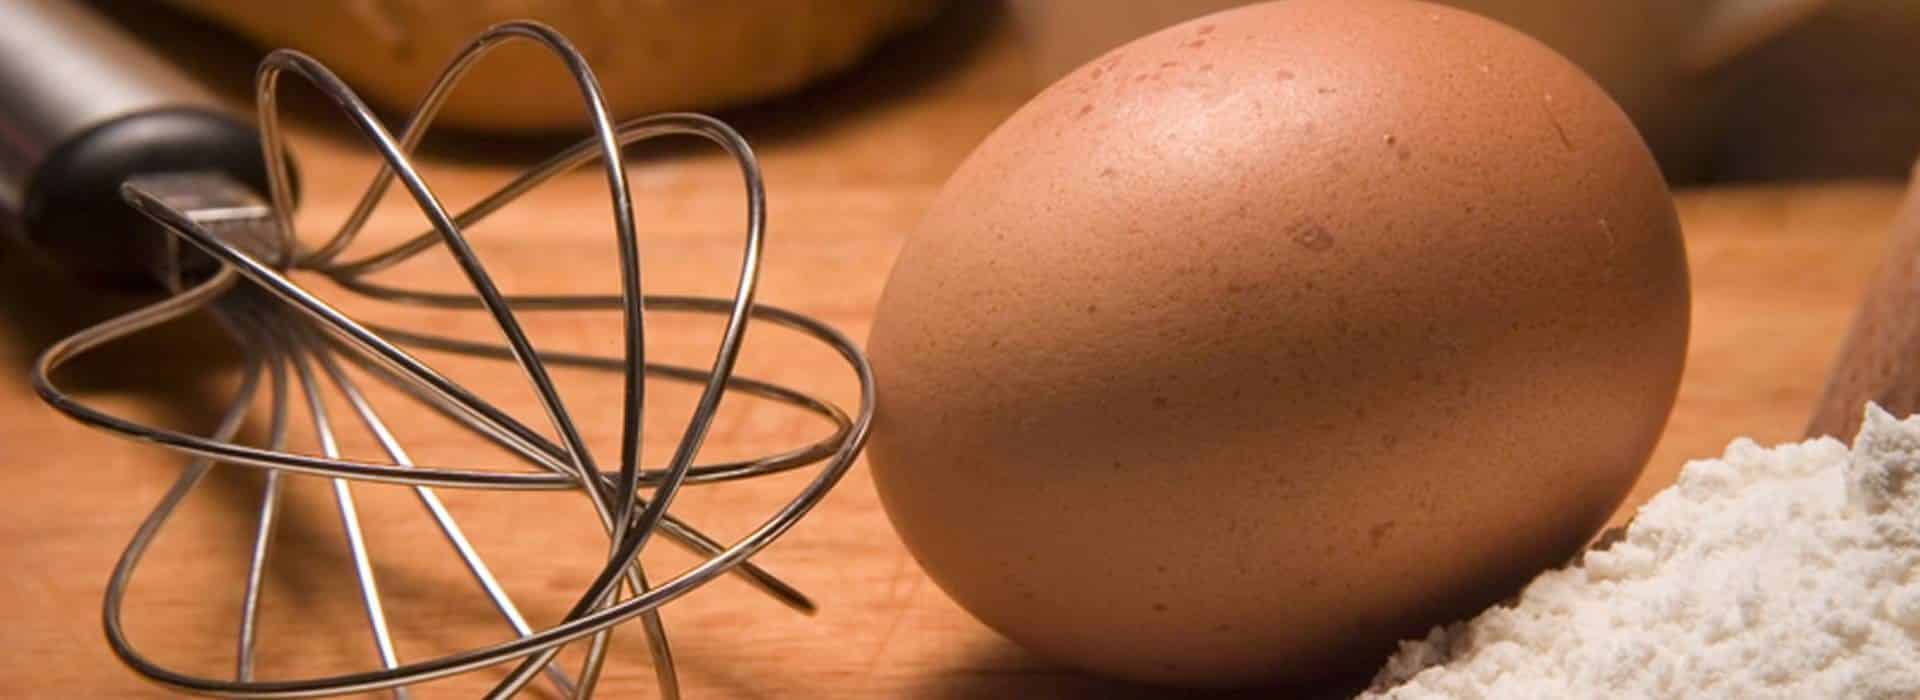 Close up view of a brown egg and metal whisk